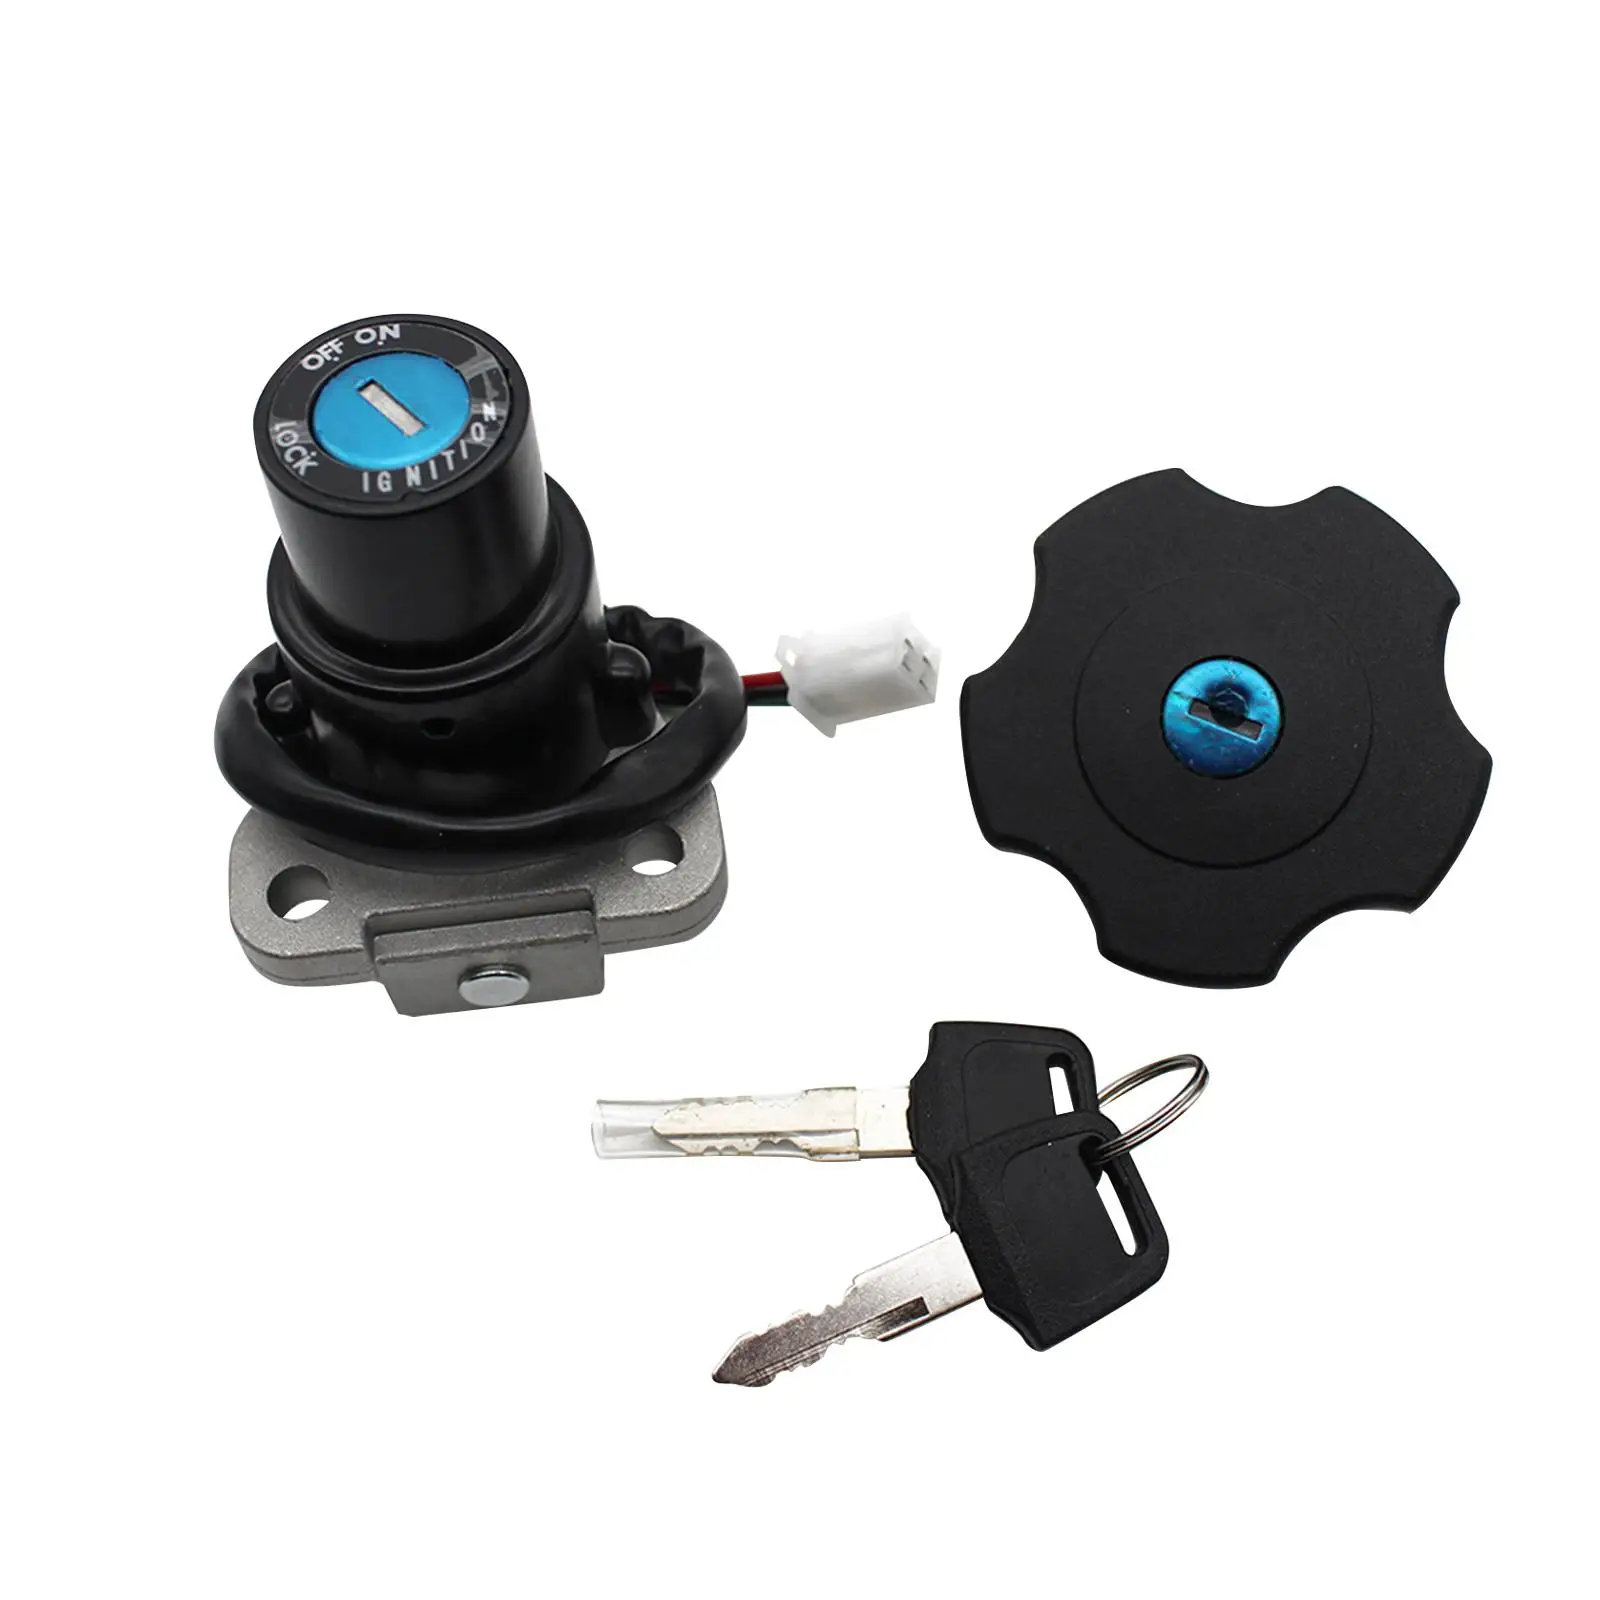 Motorcycle Lgnition Start Switch for DT200 DT200R 1991-1994 Replacement